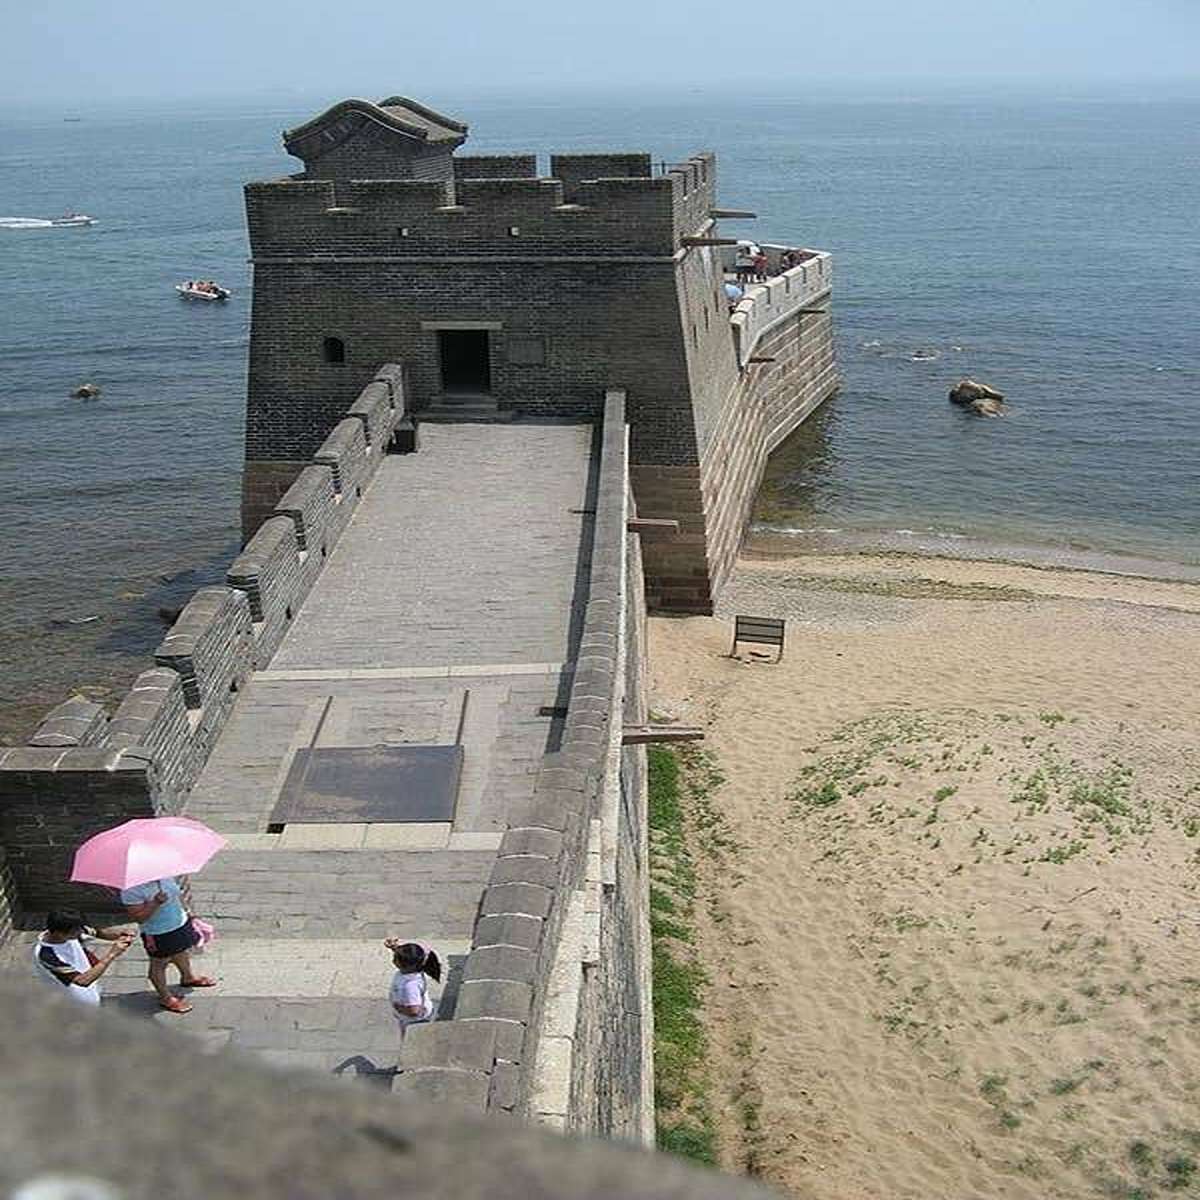 This is what the end of the eastern portion of the Great Wall of China looks like:.